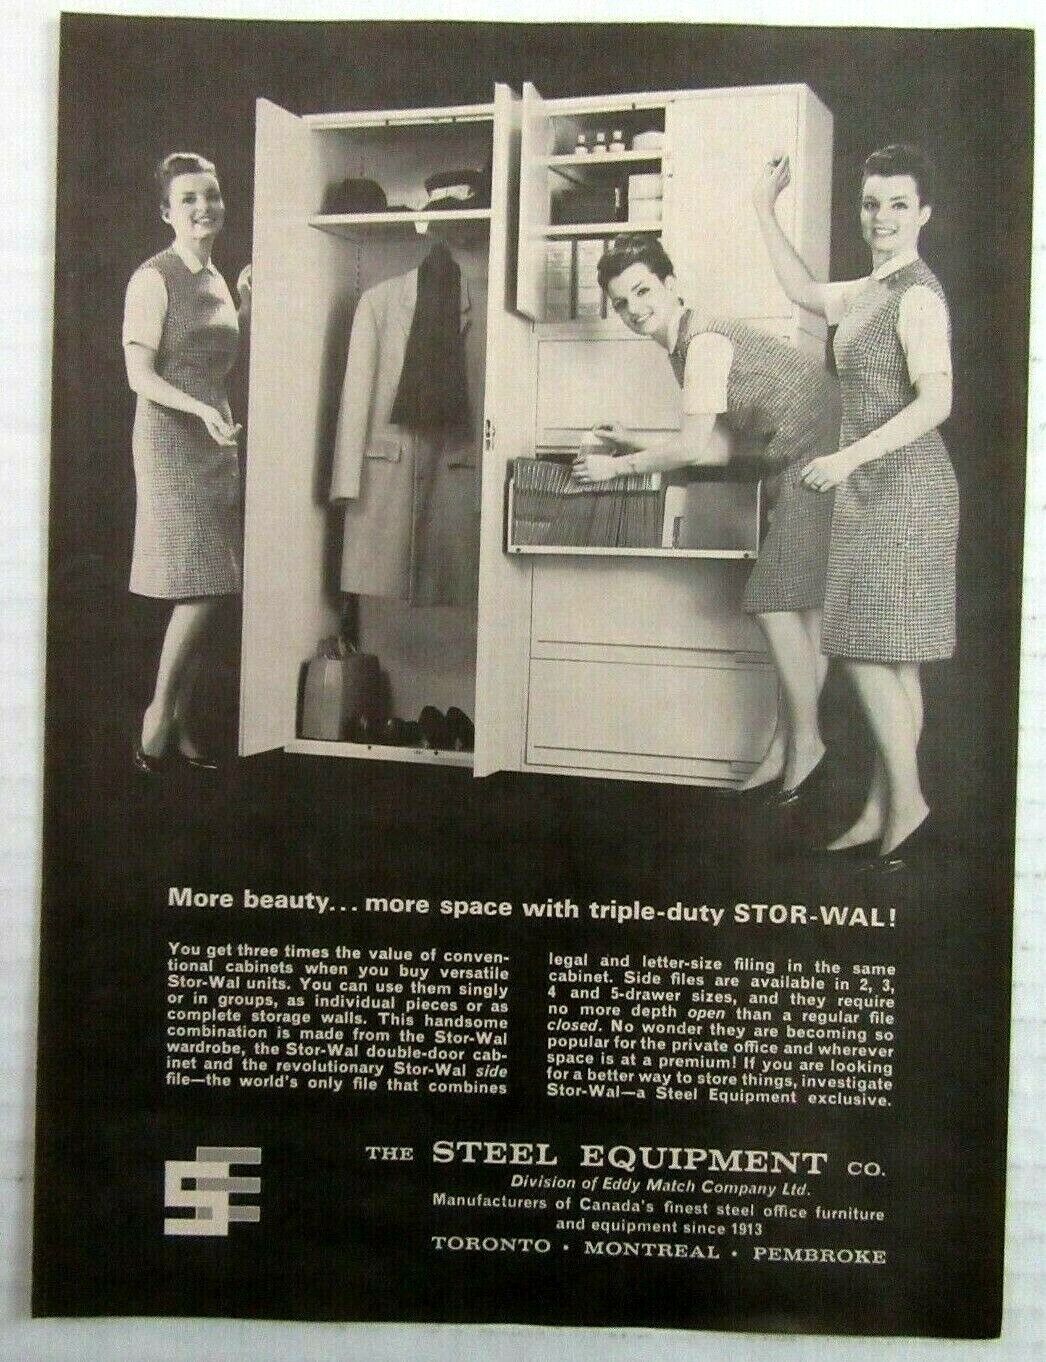 1964 THE STEEL EQUIPMENT CO. Canada\'s Steel Office Furniture Magazine Ad